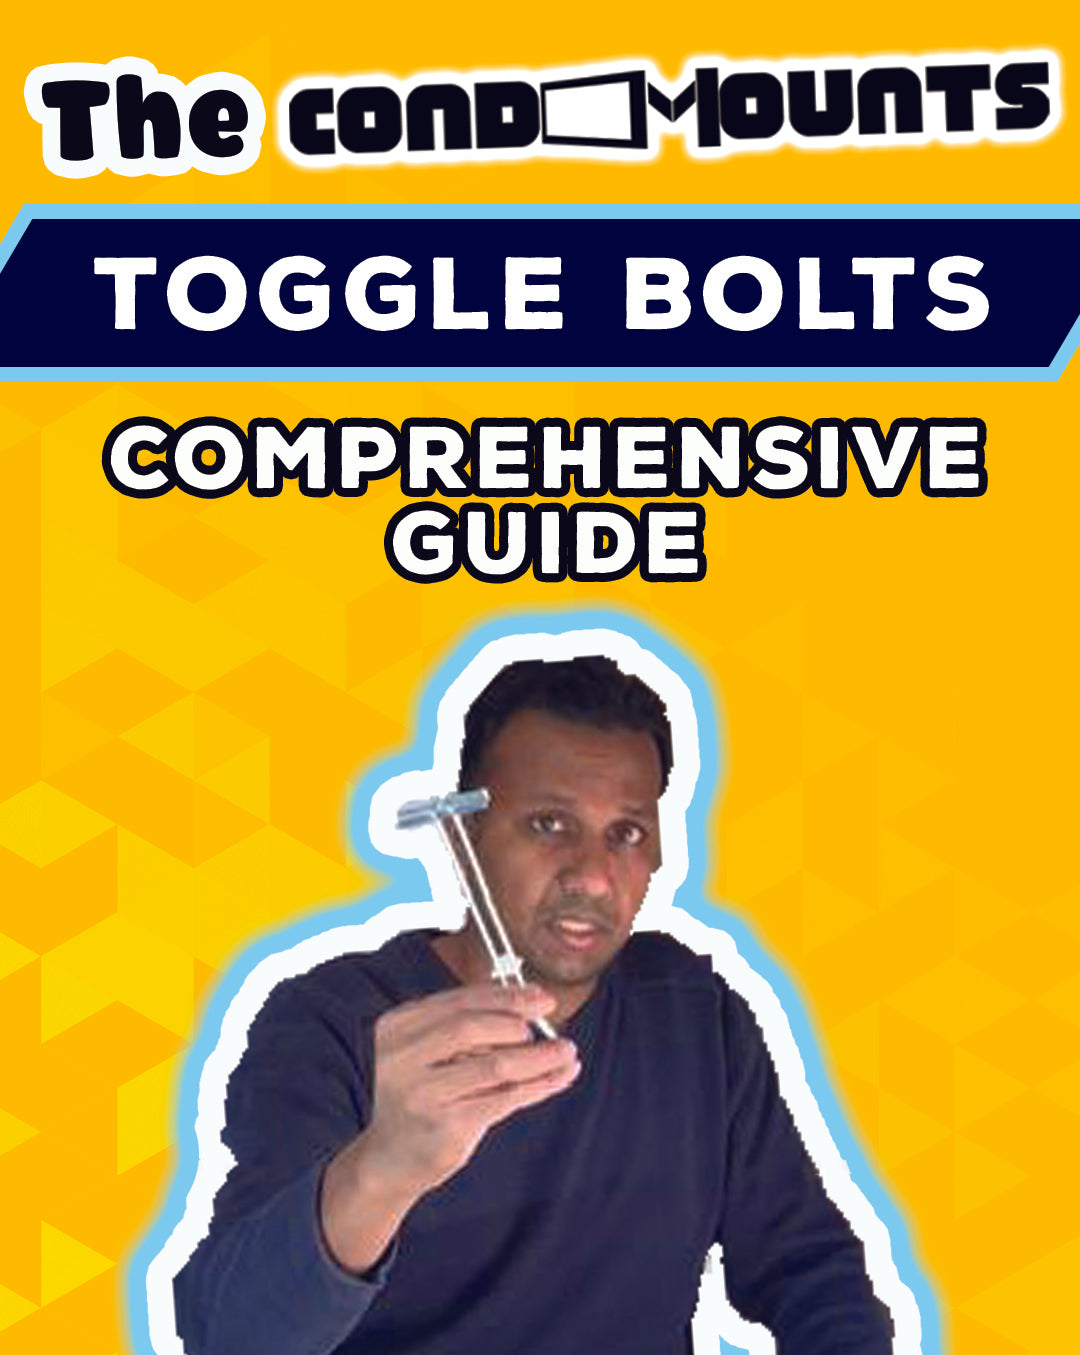 The Magic of Toggle Bolts: Simplifying TV Mounting with Condomounts